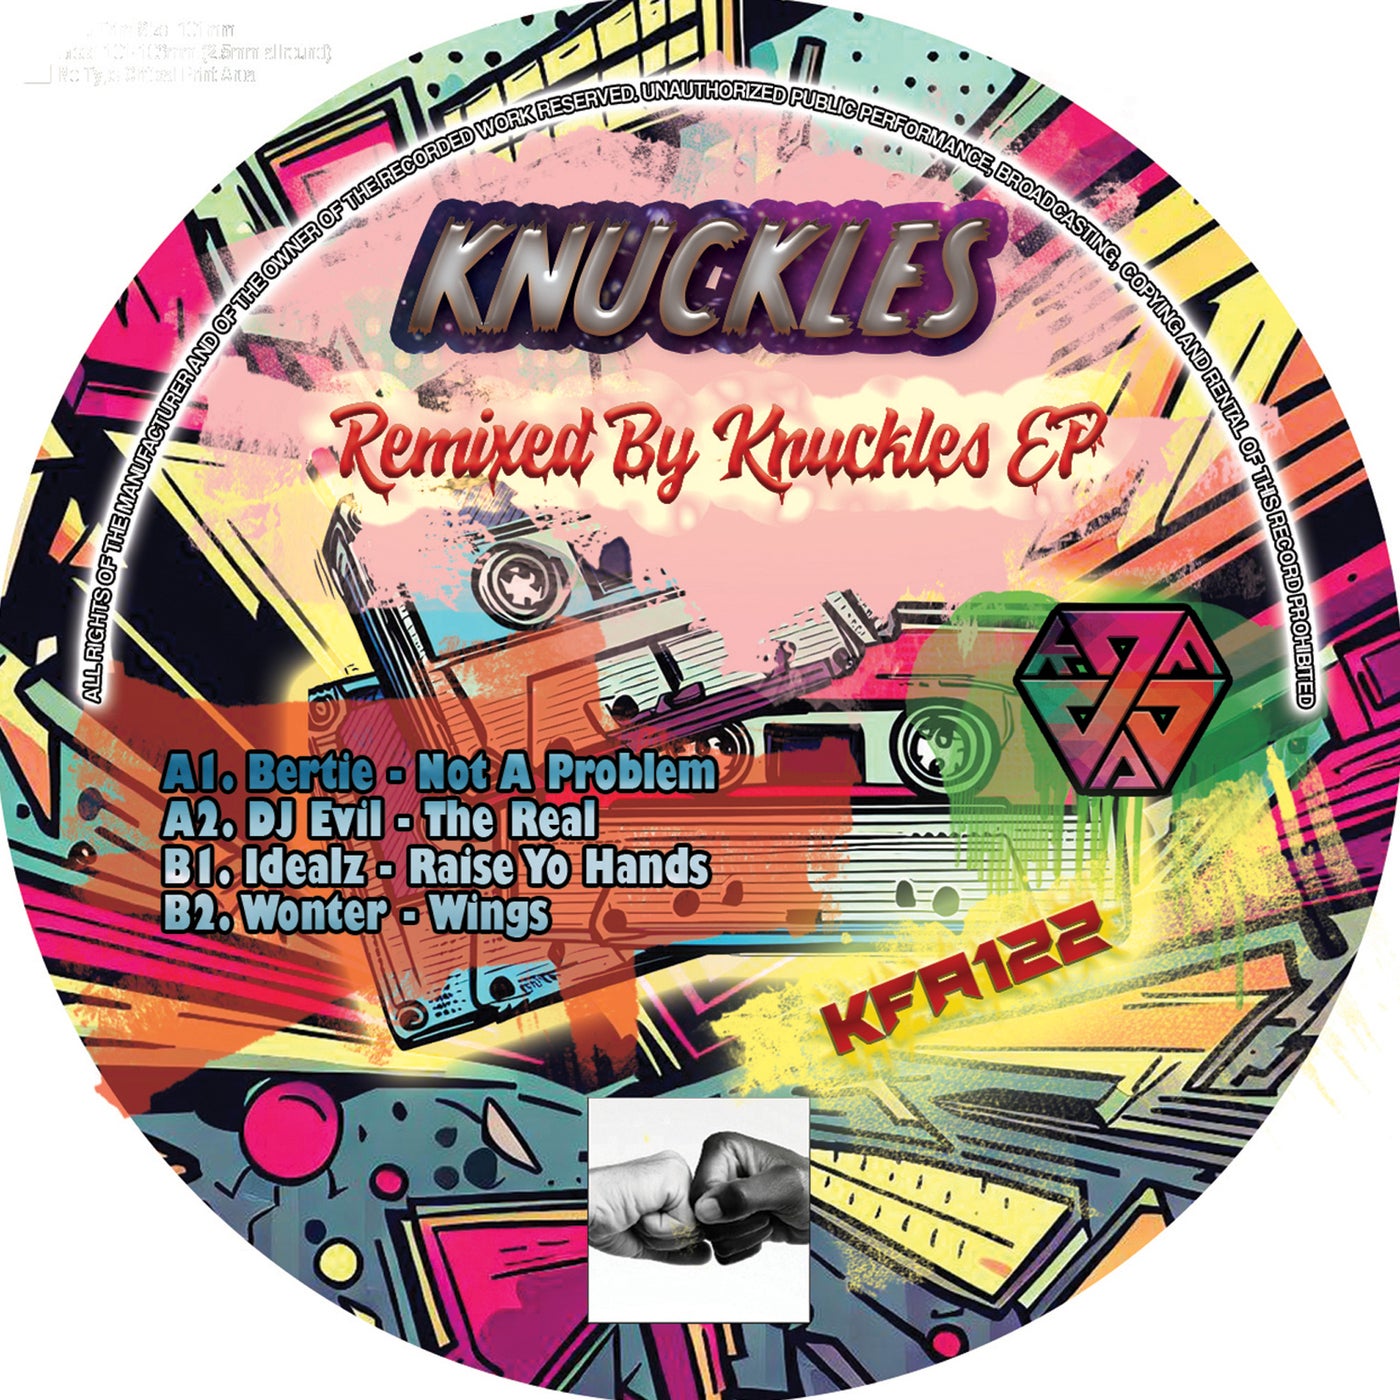 Remixed By Knuckles EP